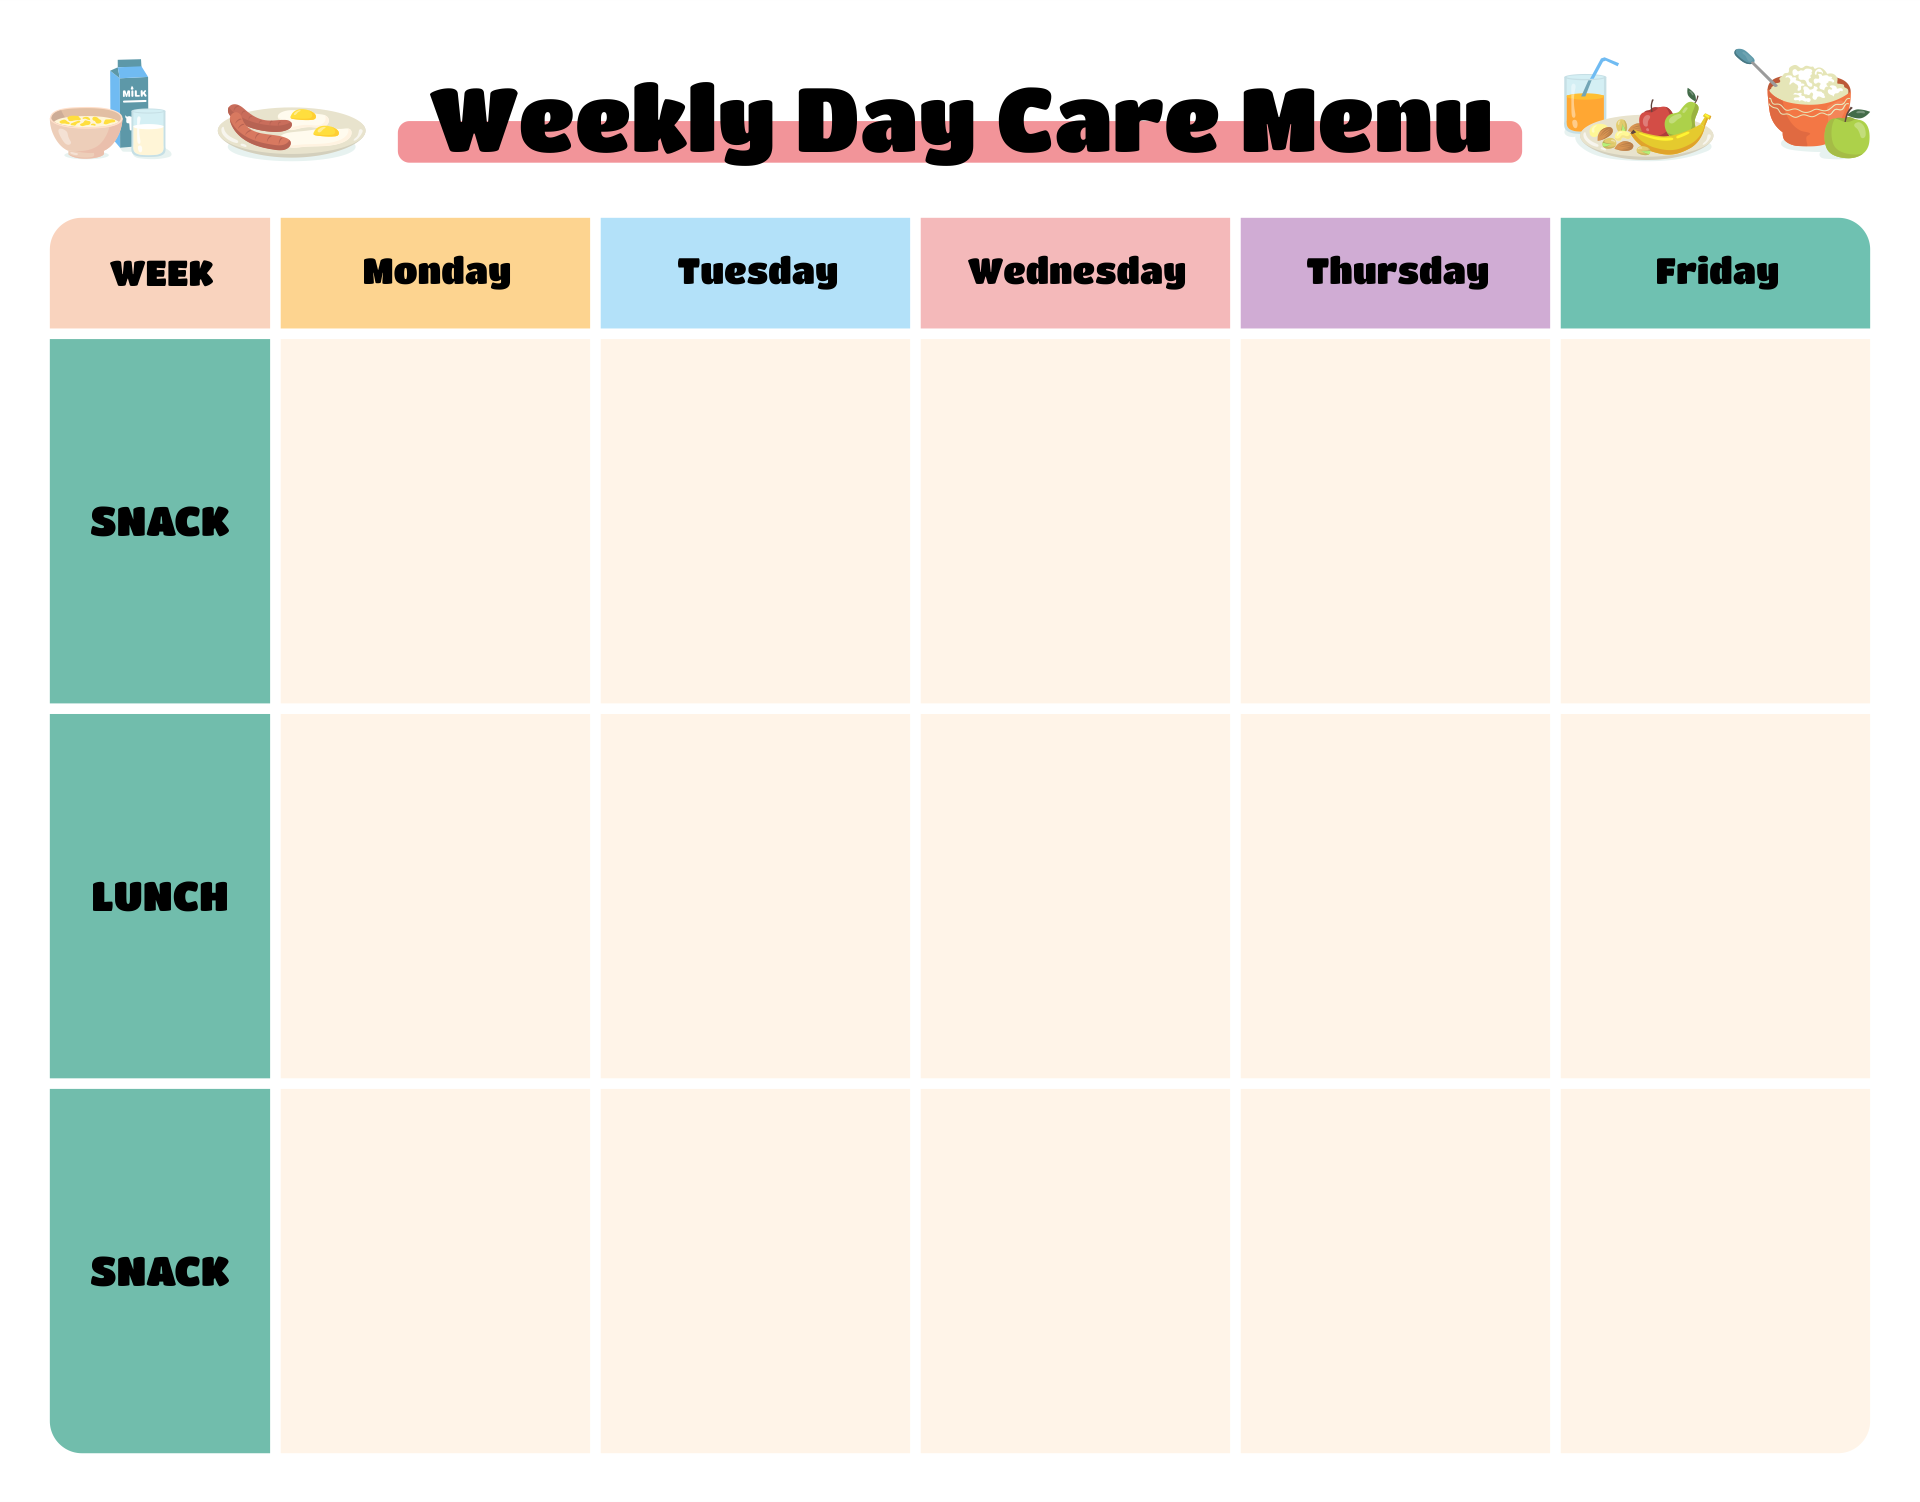 Weekly Day Care Menu Template